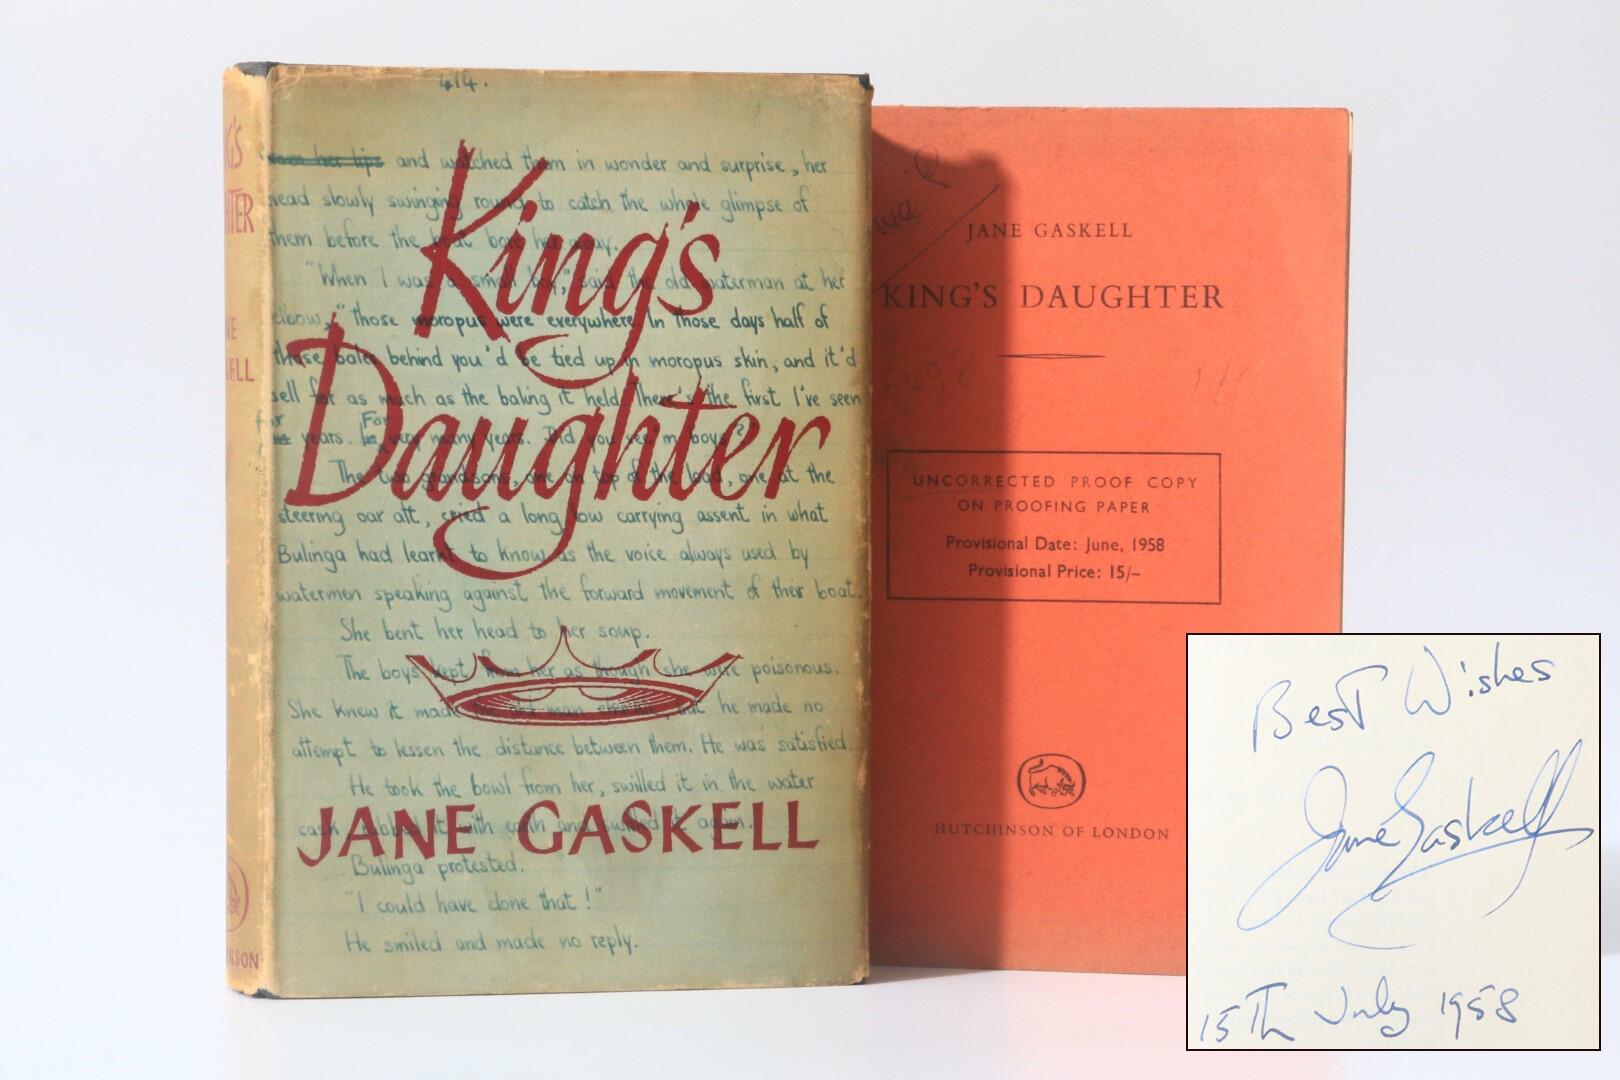 Jane Gaskell - King's Daughter - Hutchinson, 1958, Signed First Edition.